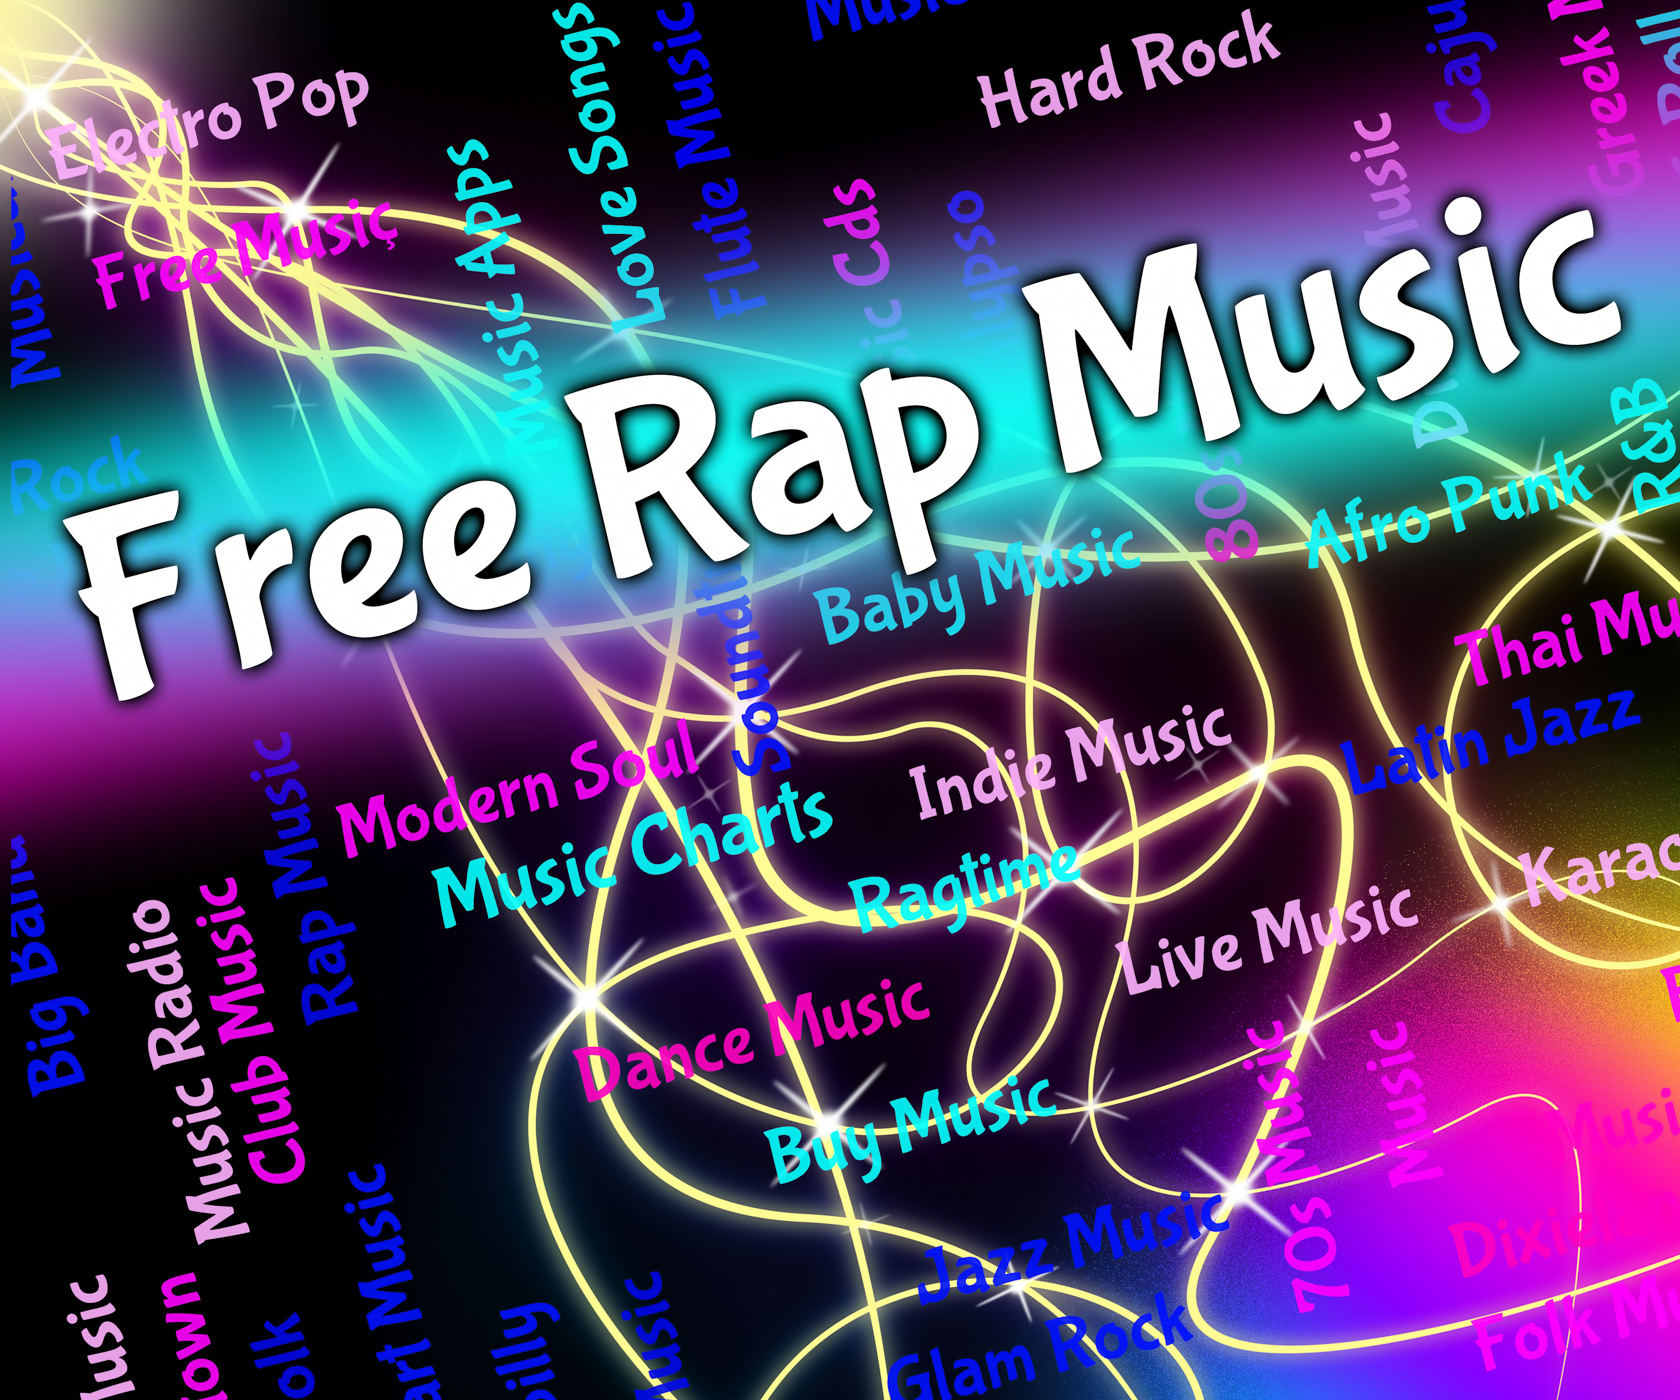 Free rap music shows spitting bars and audio photo